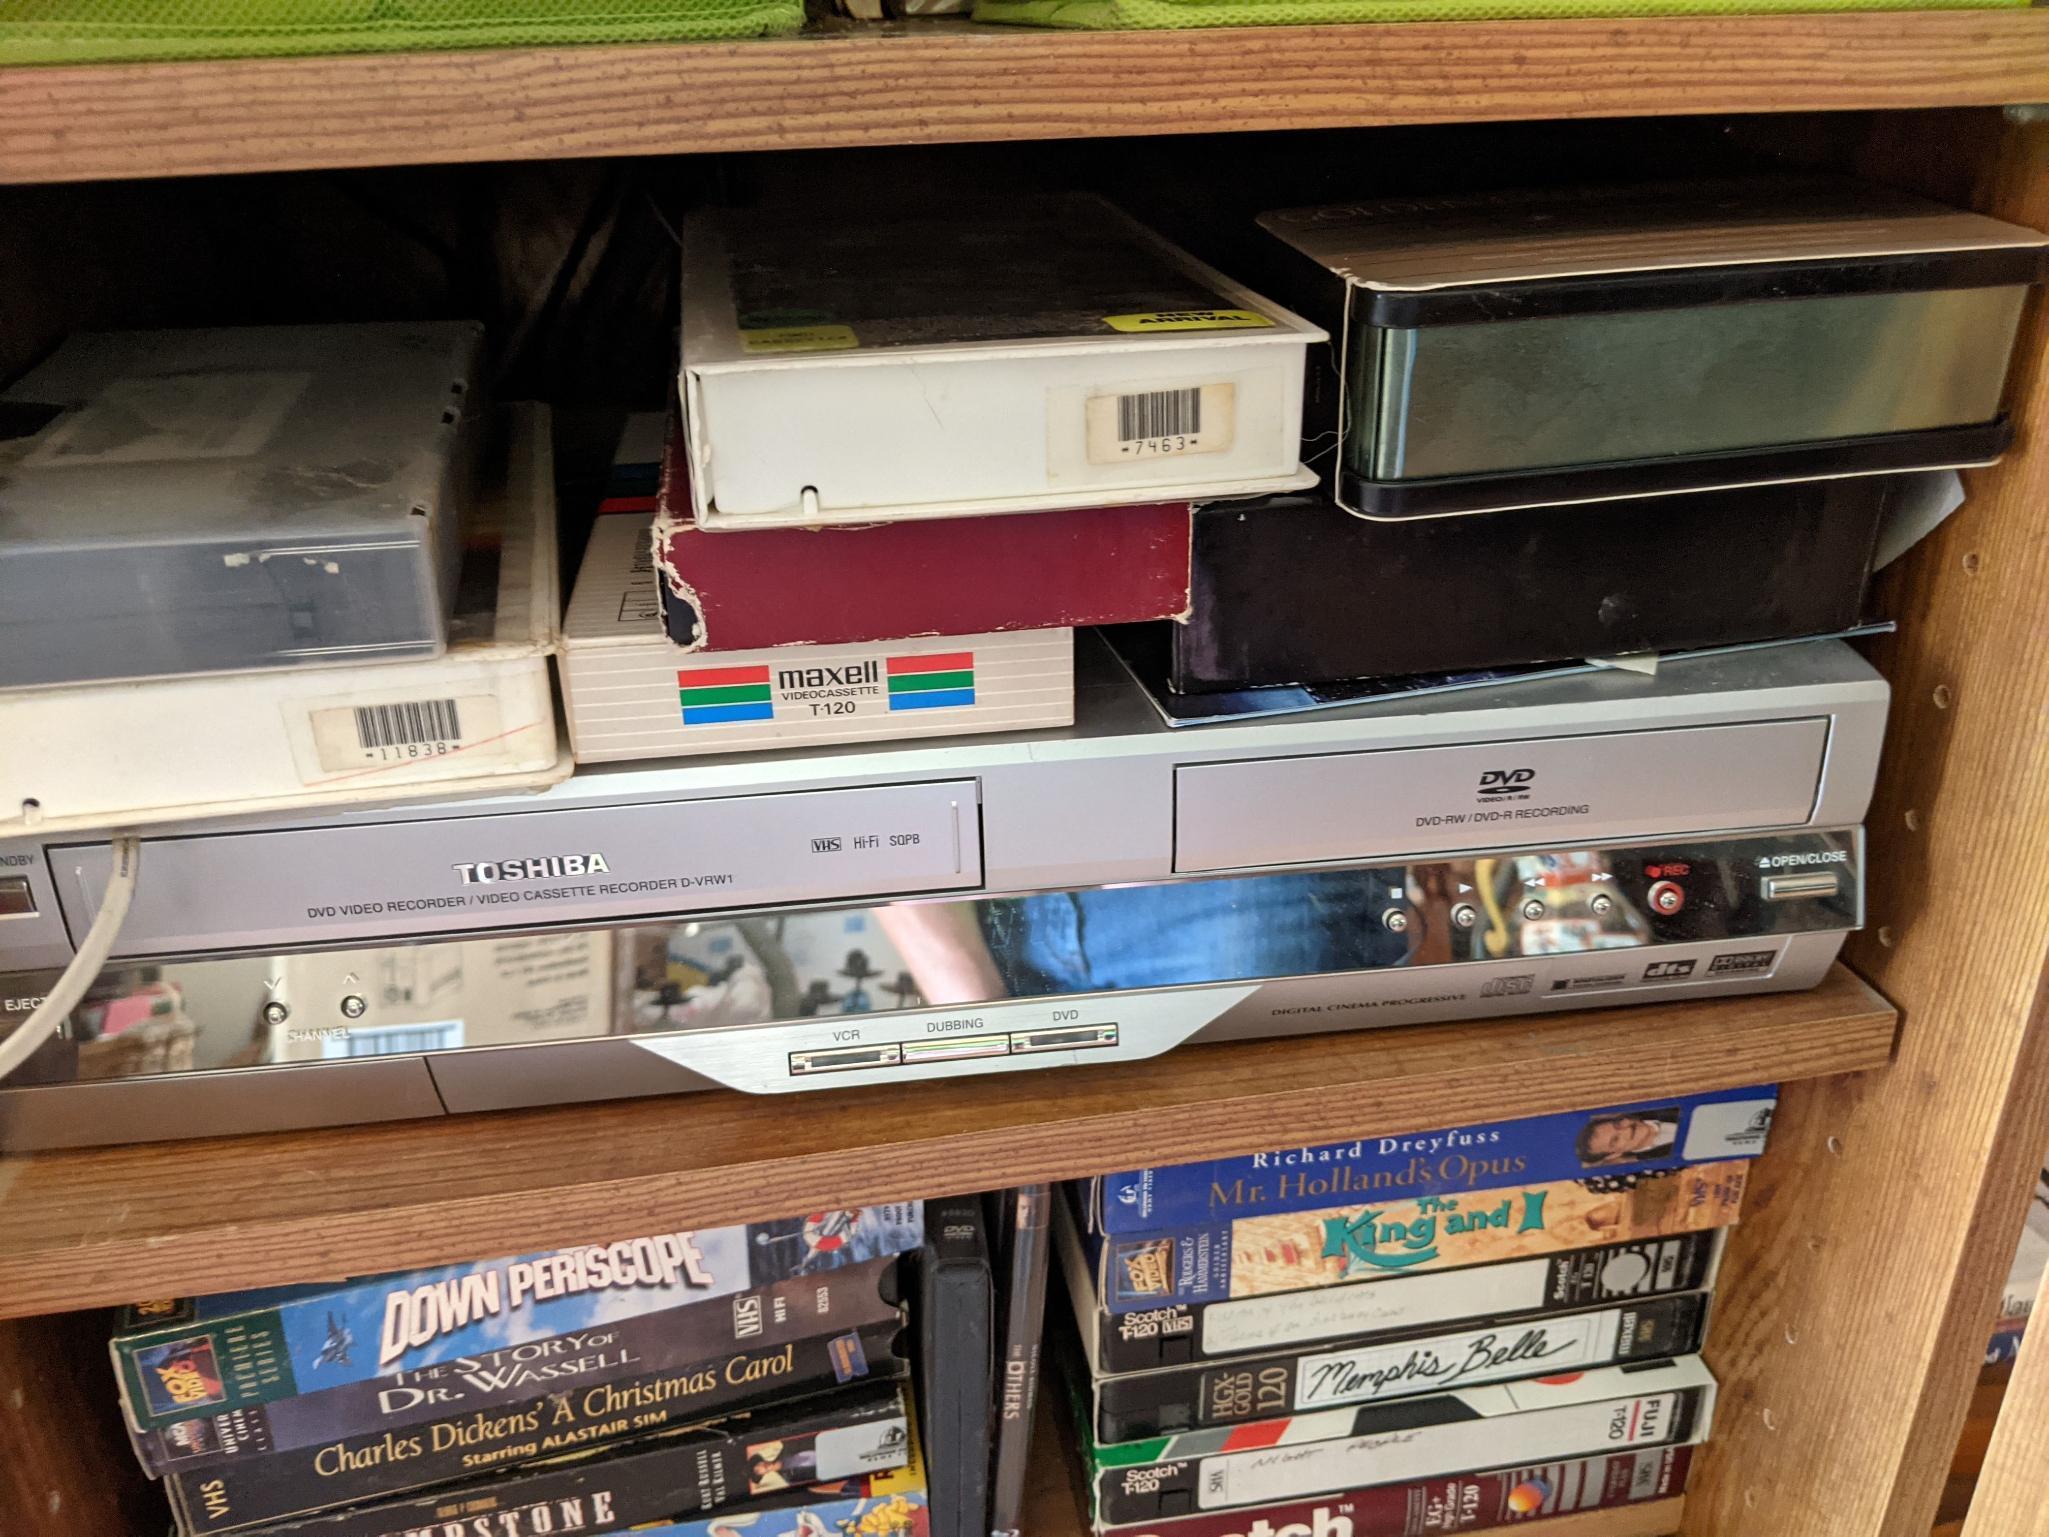 Toshiba VCR and Large Collection of CDs and VHS Tapes